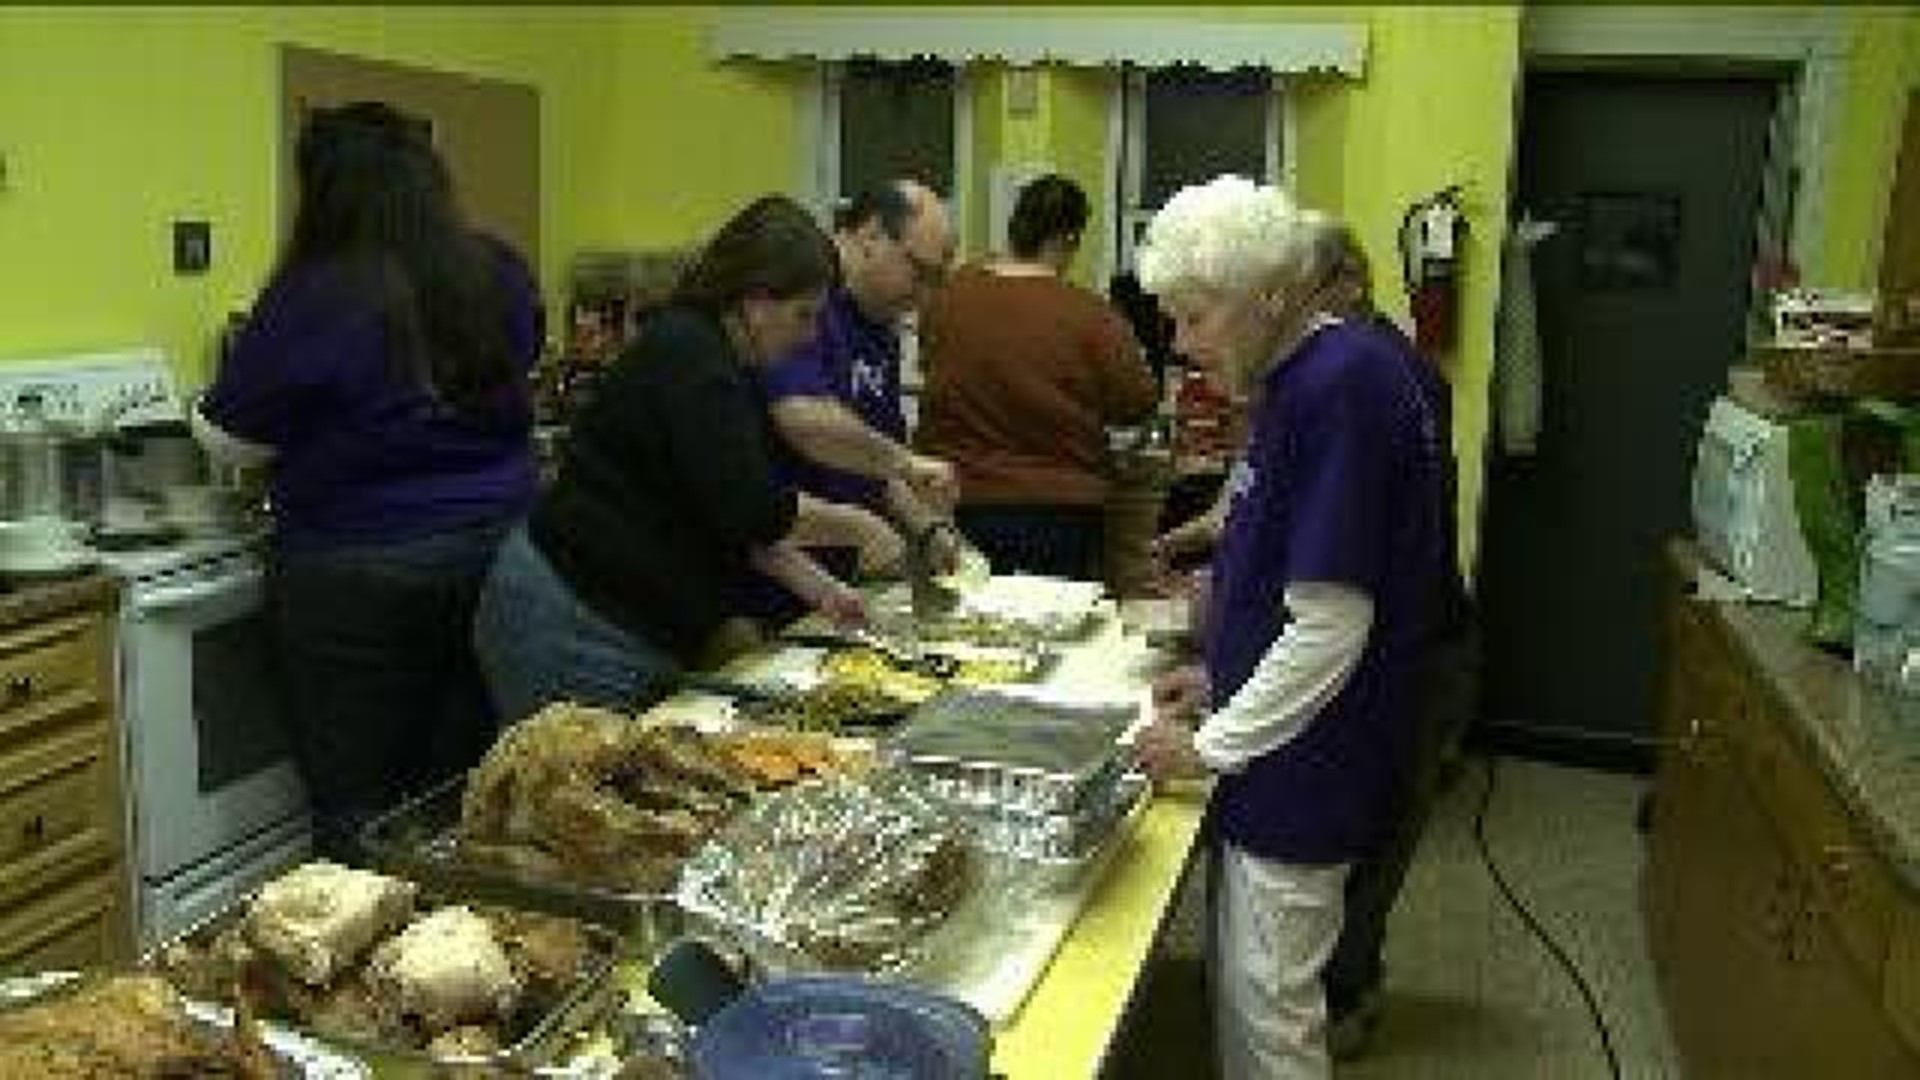 Free Thanksgiving Meals in Our Area